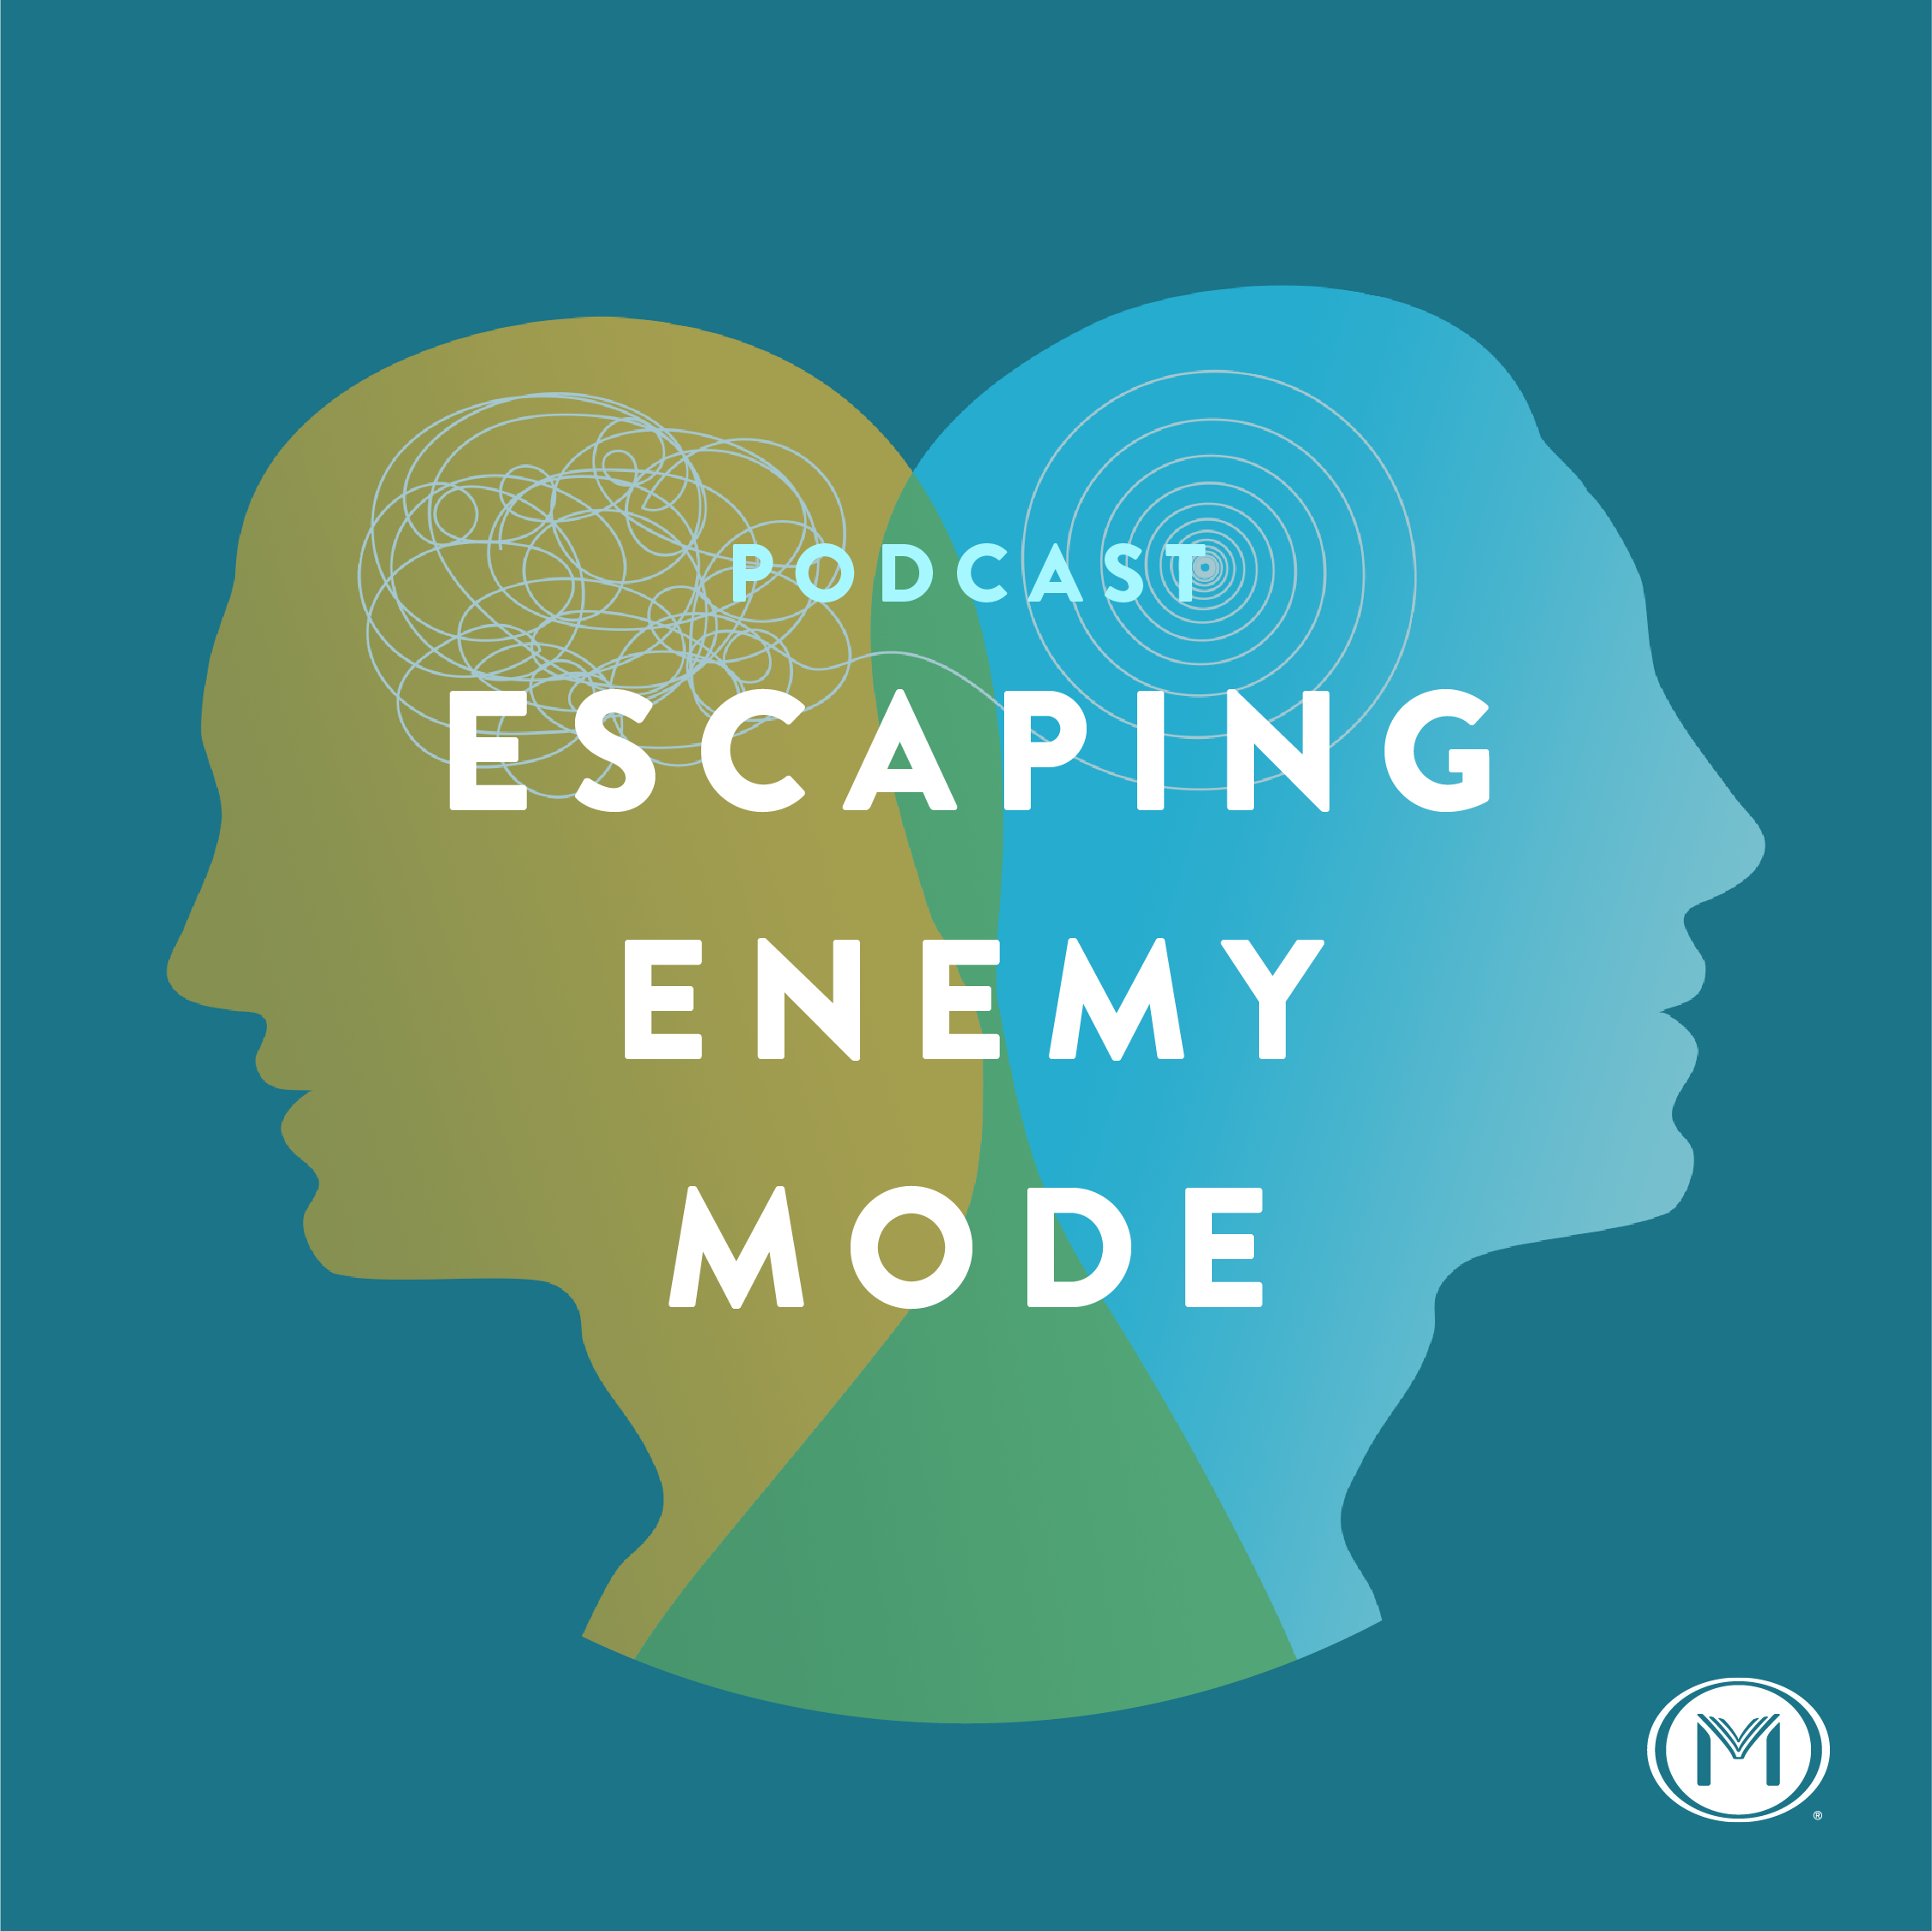 What is Enemy Mode?